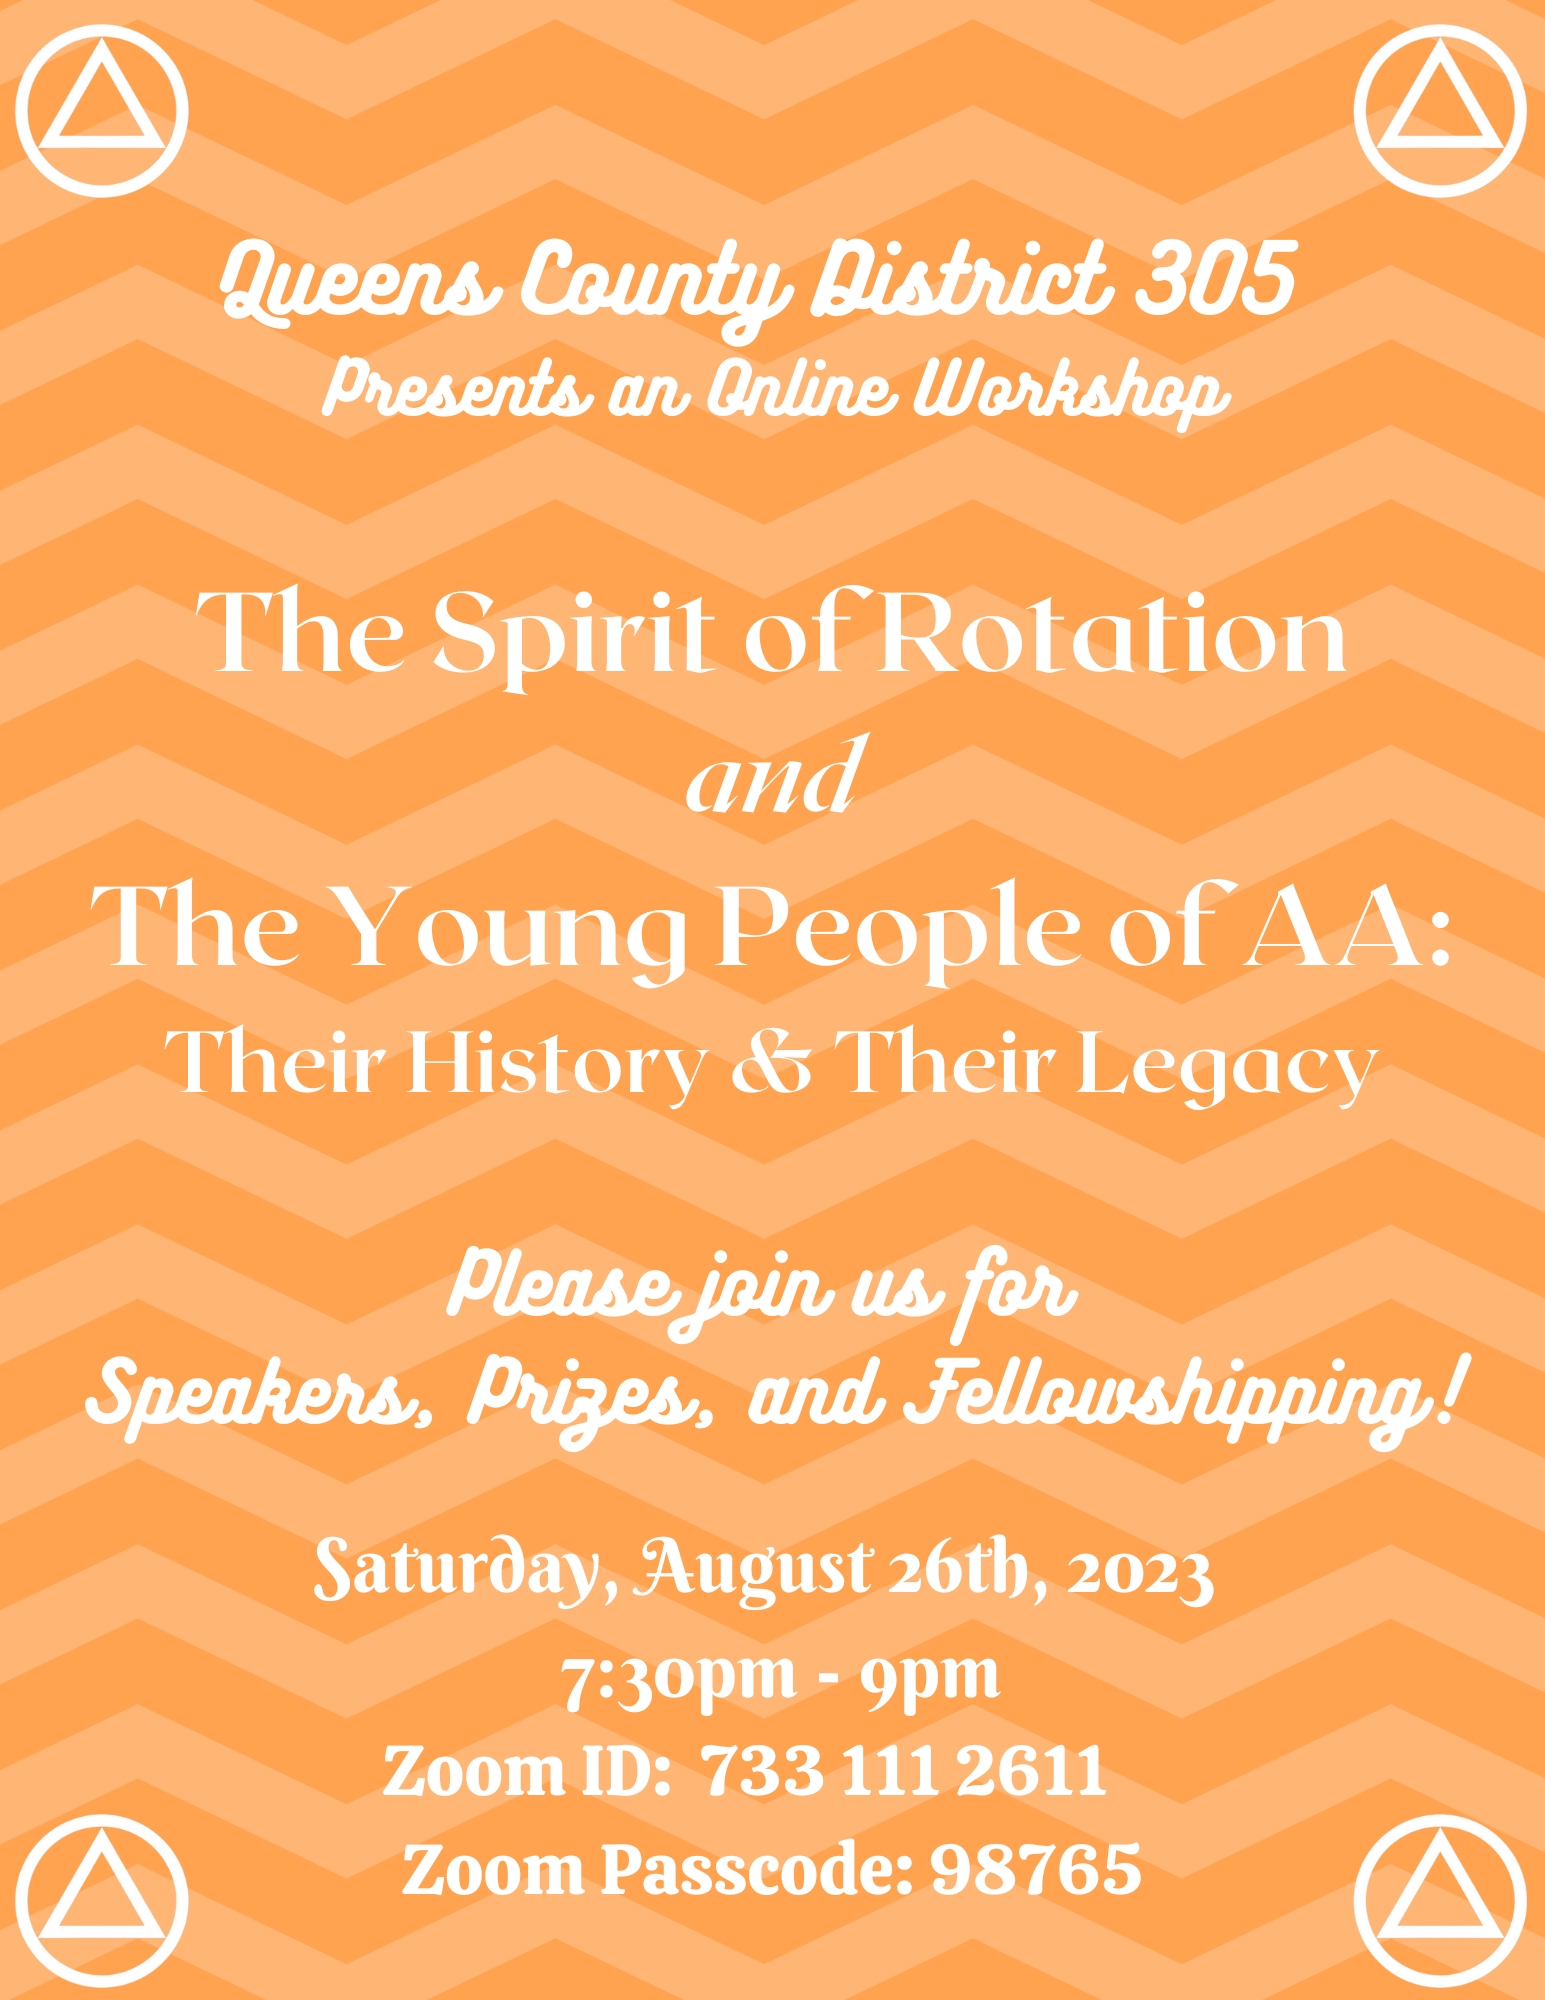 Online Workshop: The Spirit of Rotation and The Young People of AA